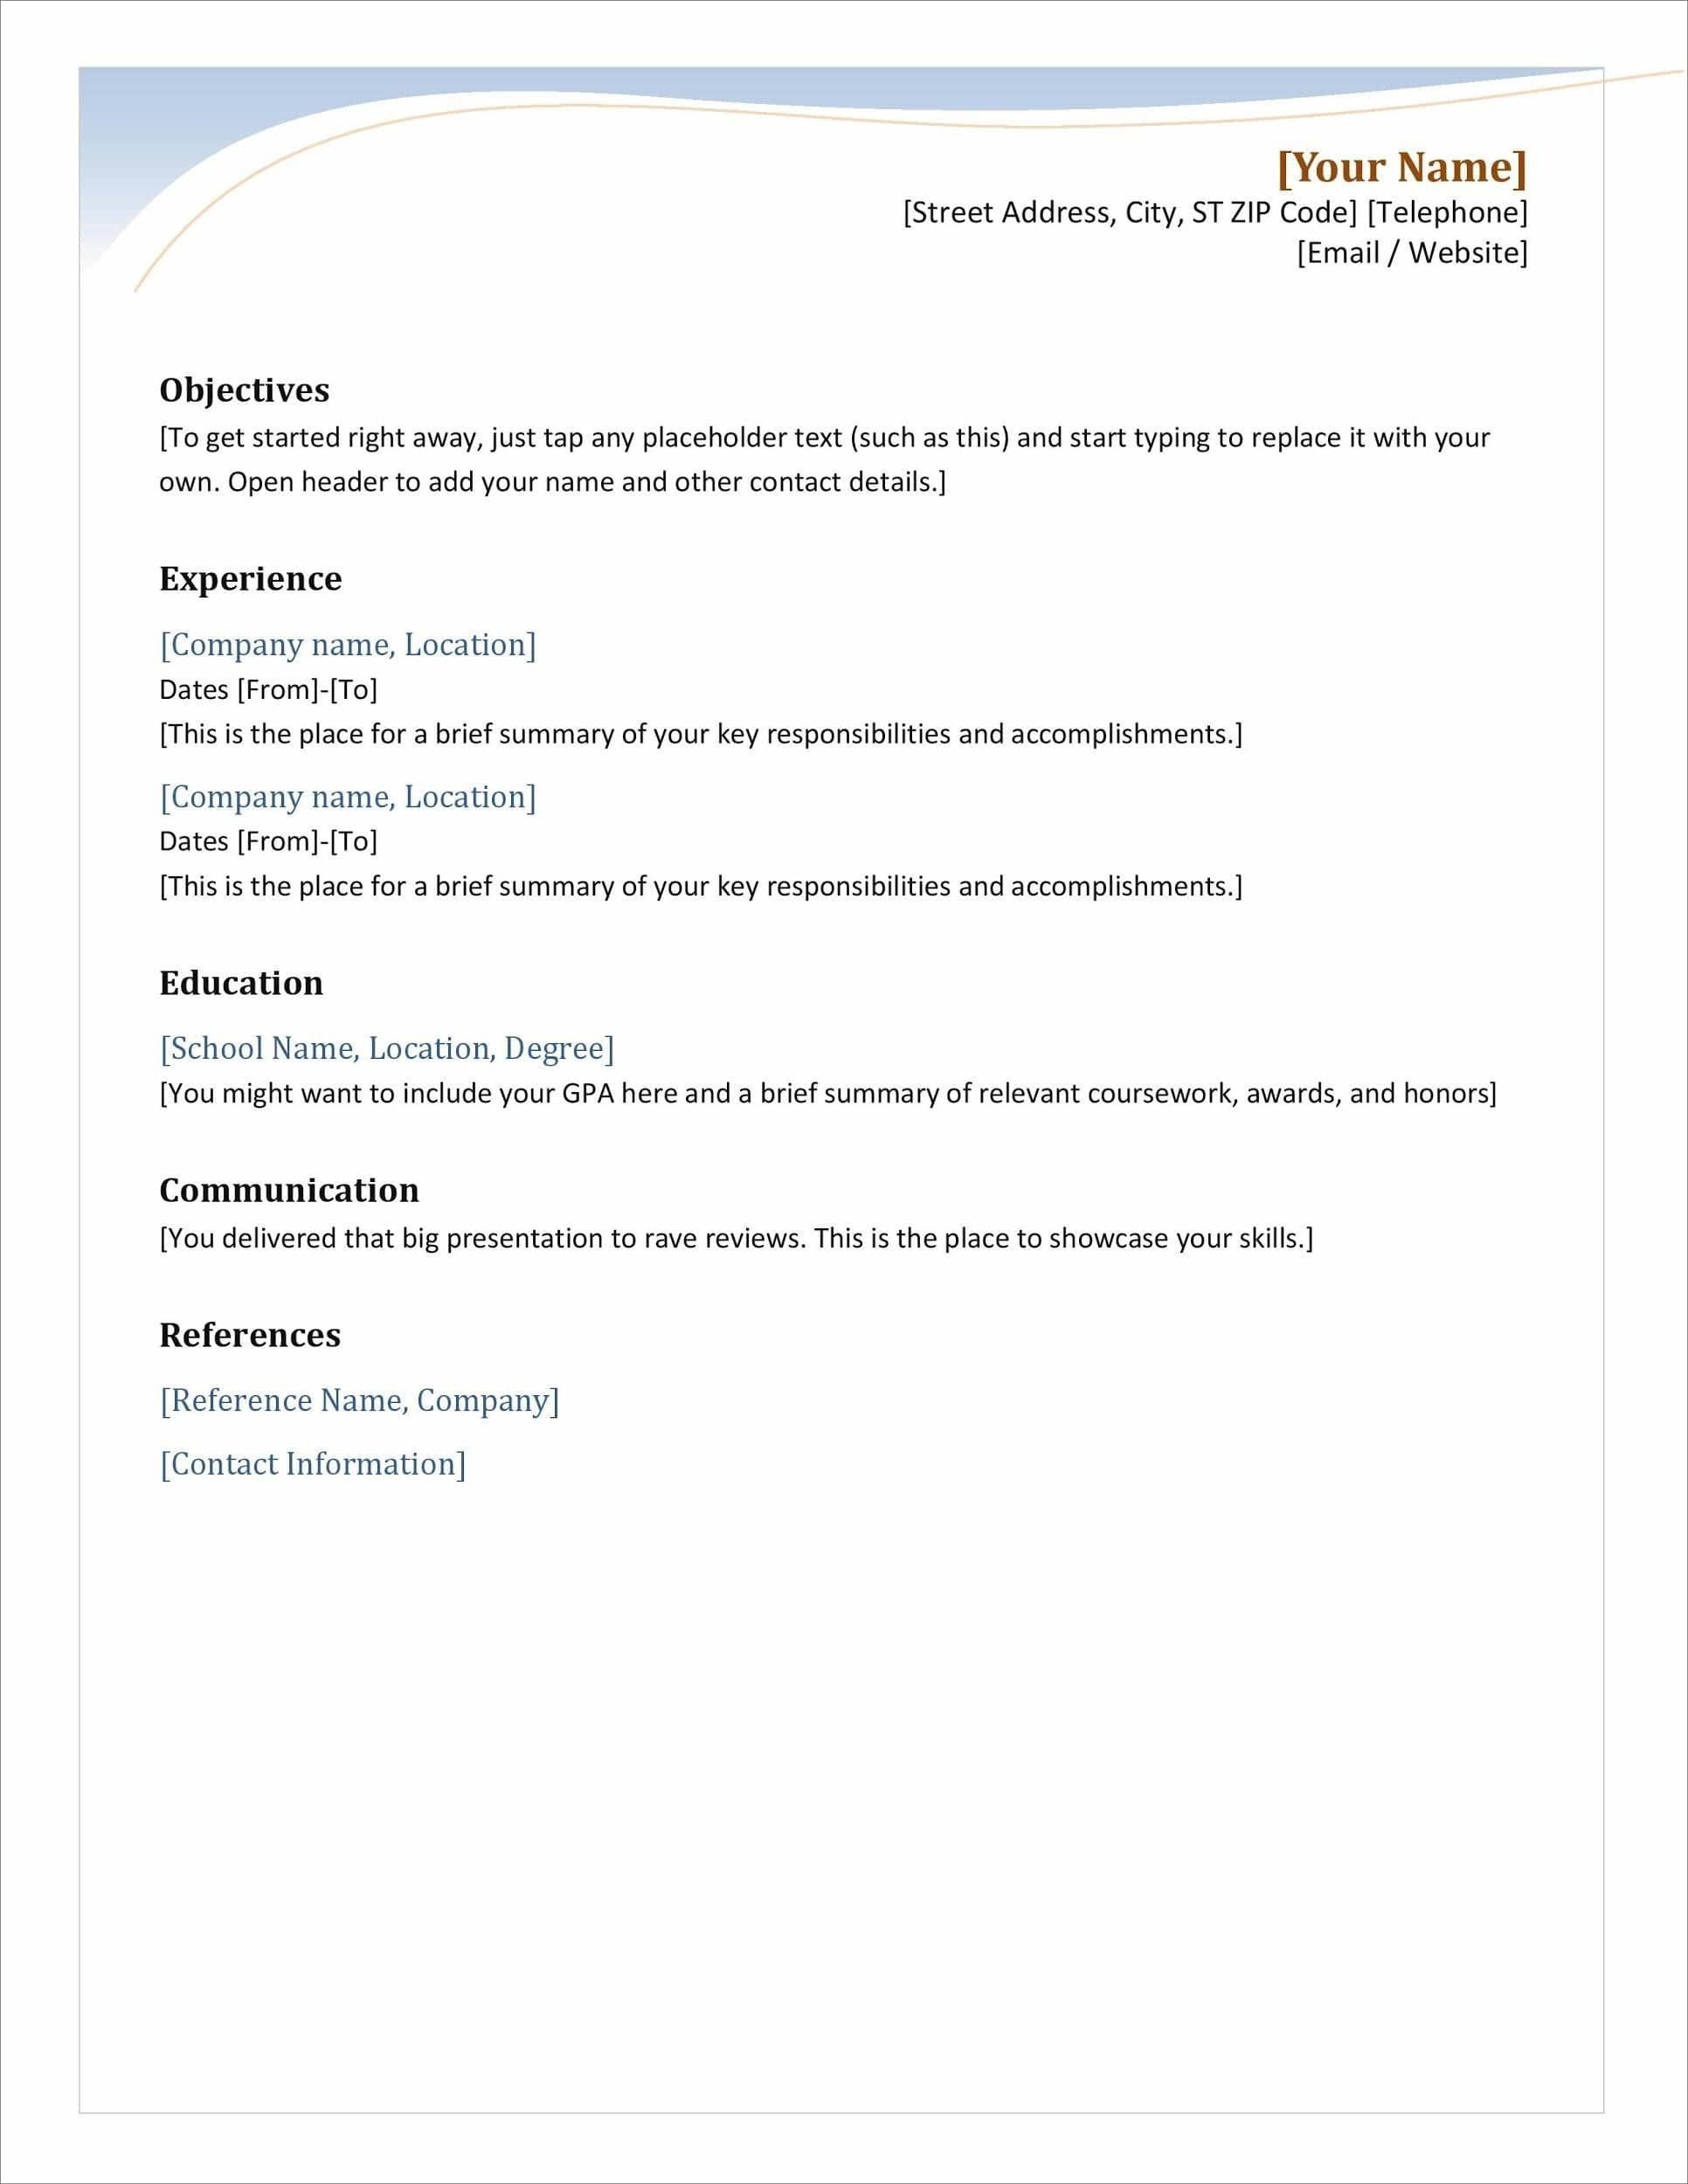 25 Resume Templates For Microsoft Word [Free Download] Inside How To Find A Resume Template On Word